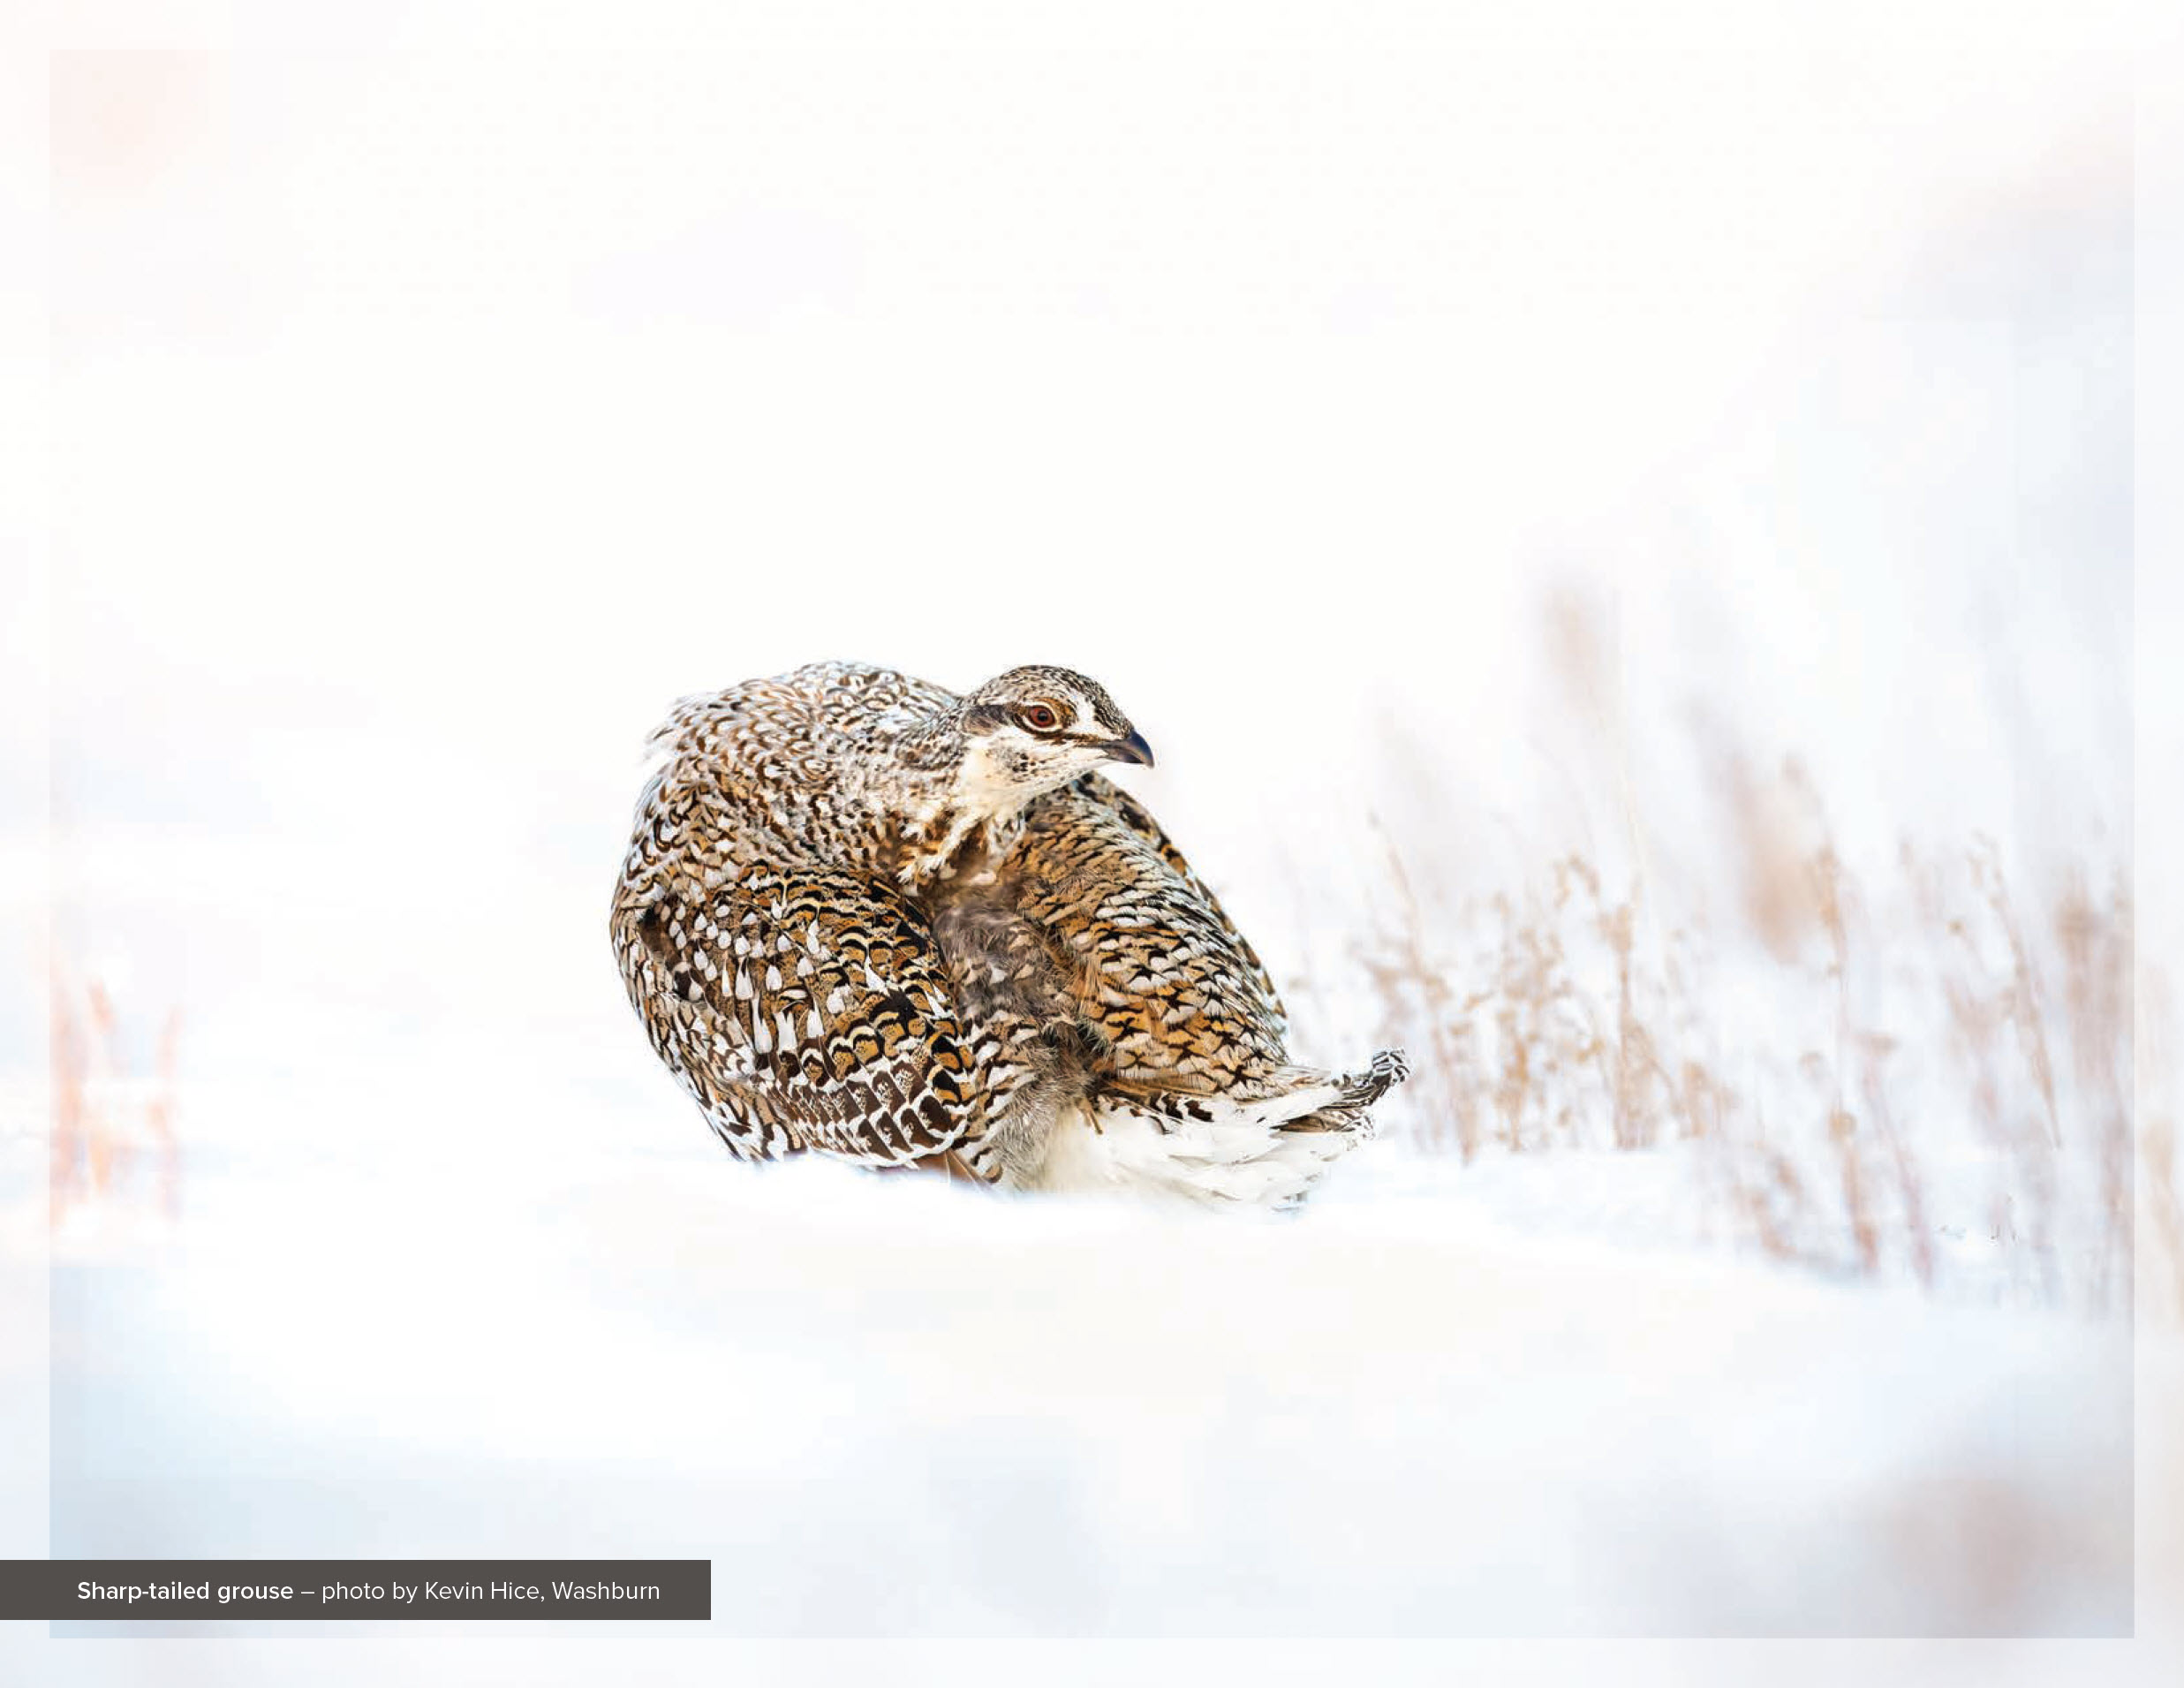 Sharp-tailed grouse – photo by Kevin Hice, Washburn